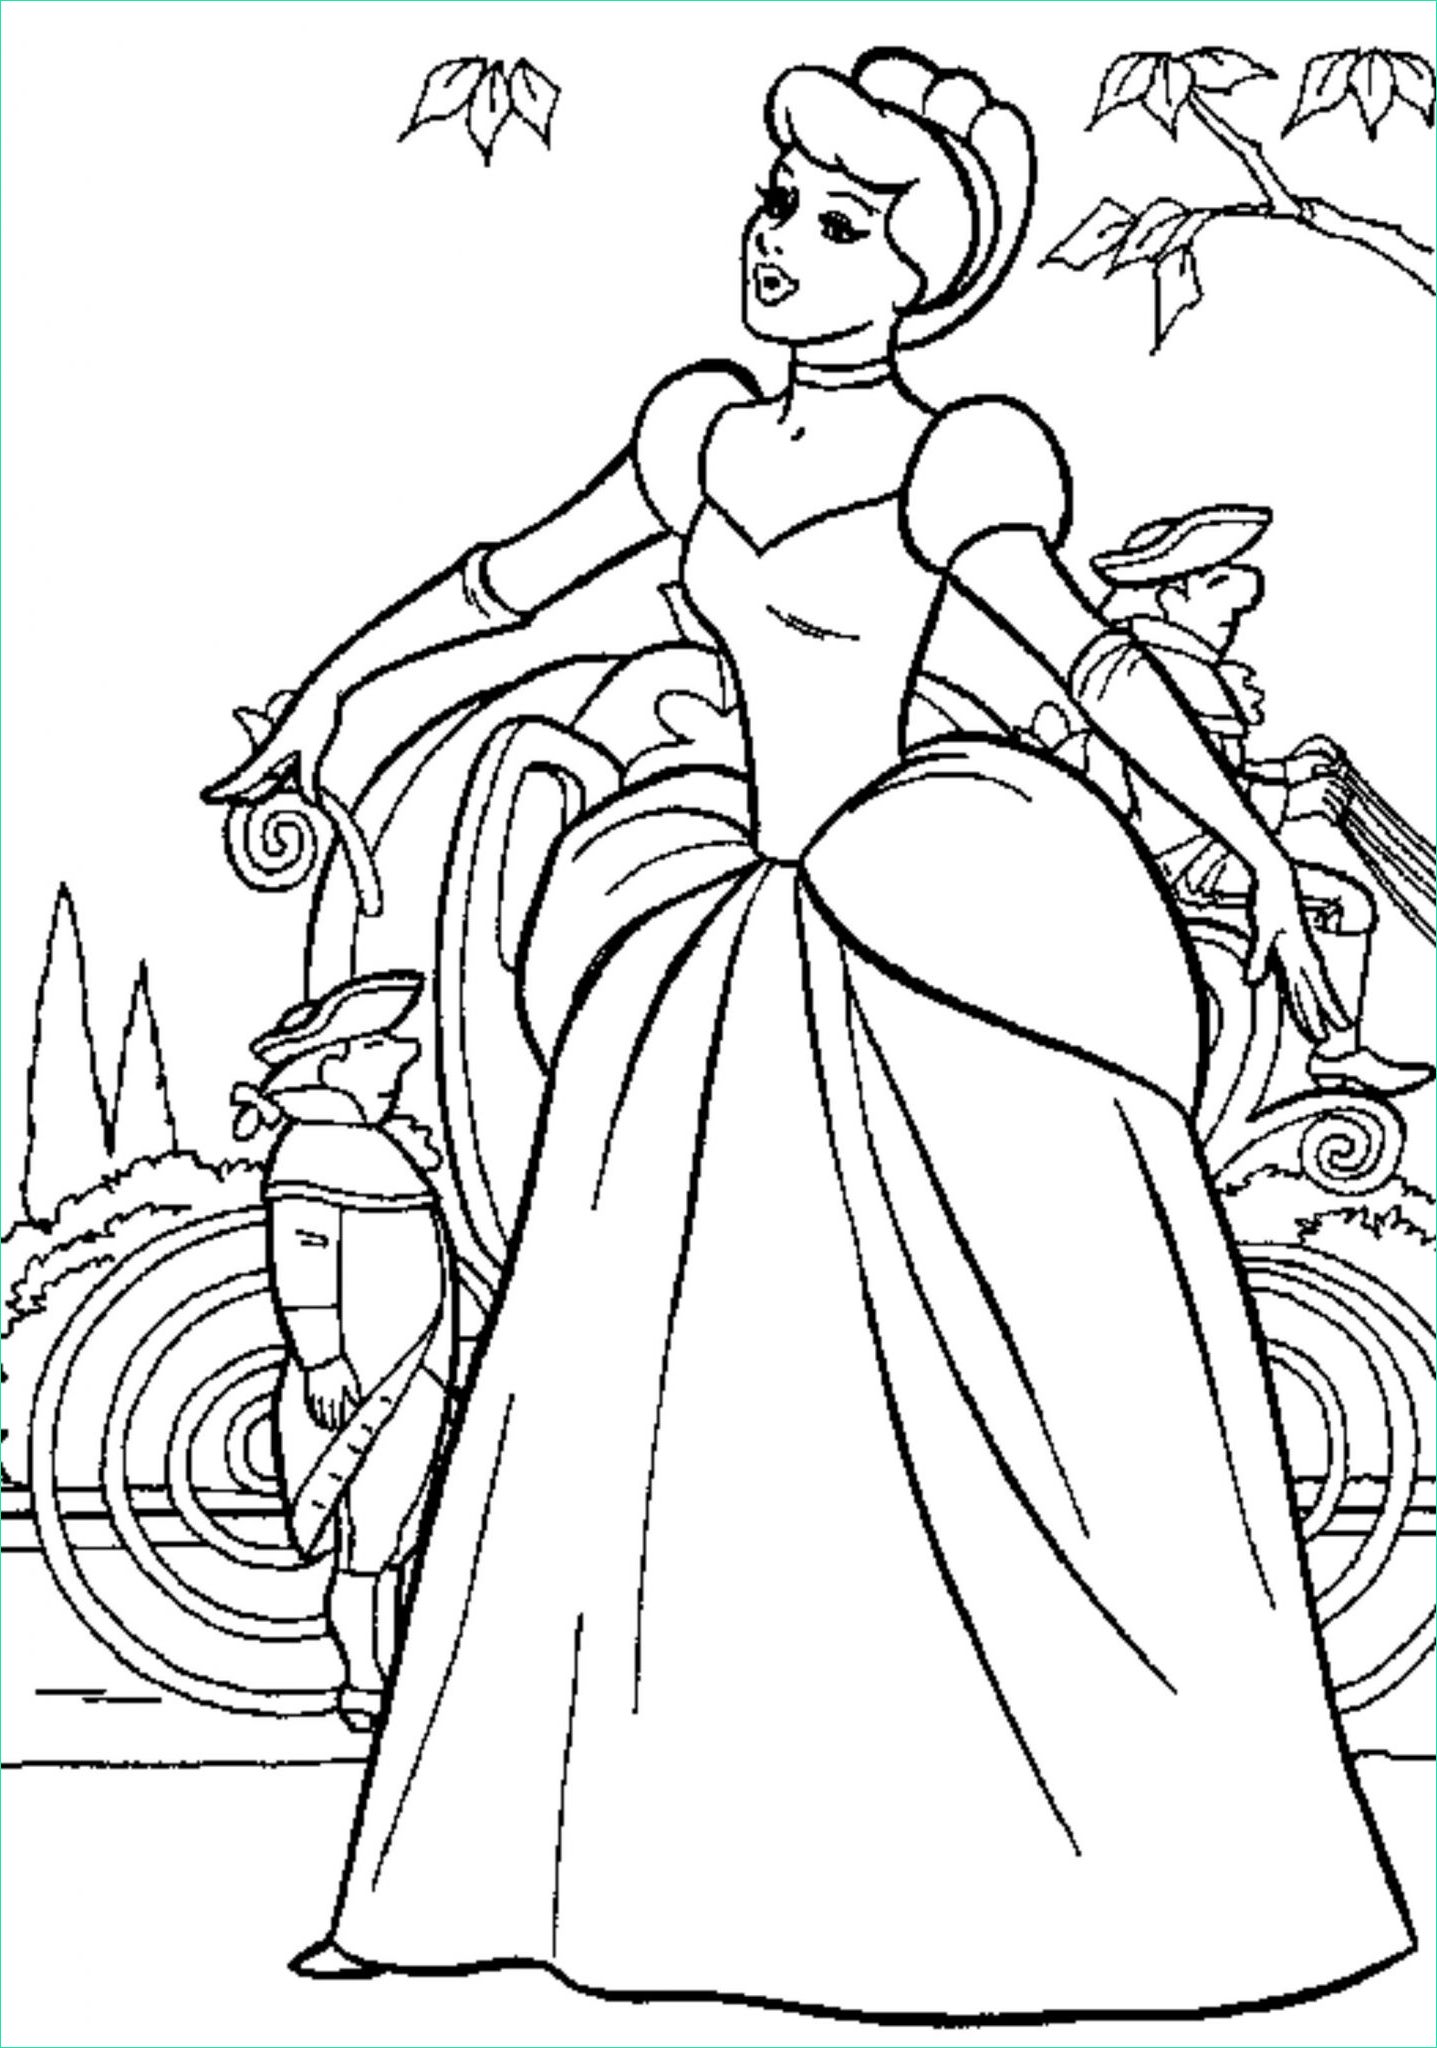 Coloriage Pricesse Beau Images Print &amp; Download Princess Coloring Pages Support the